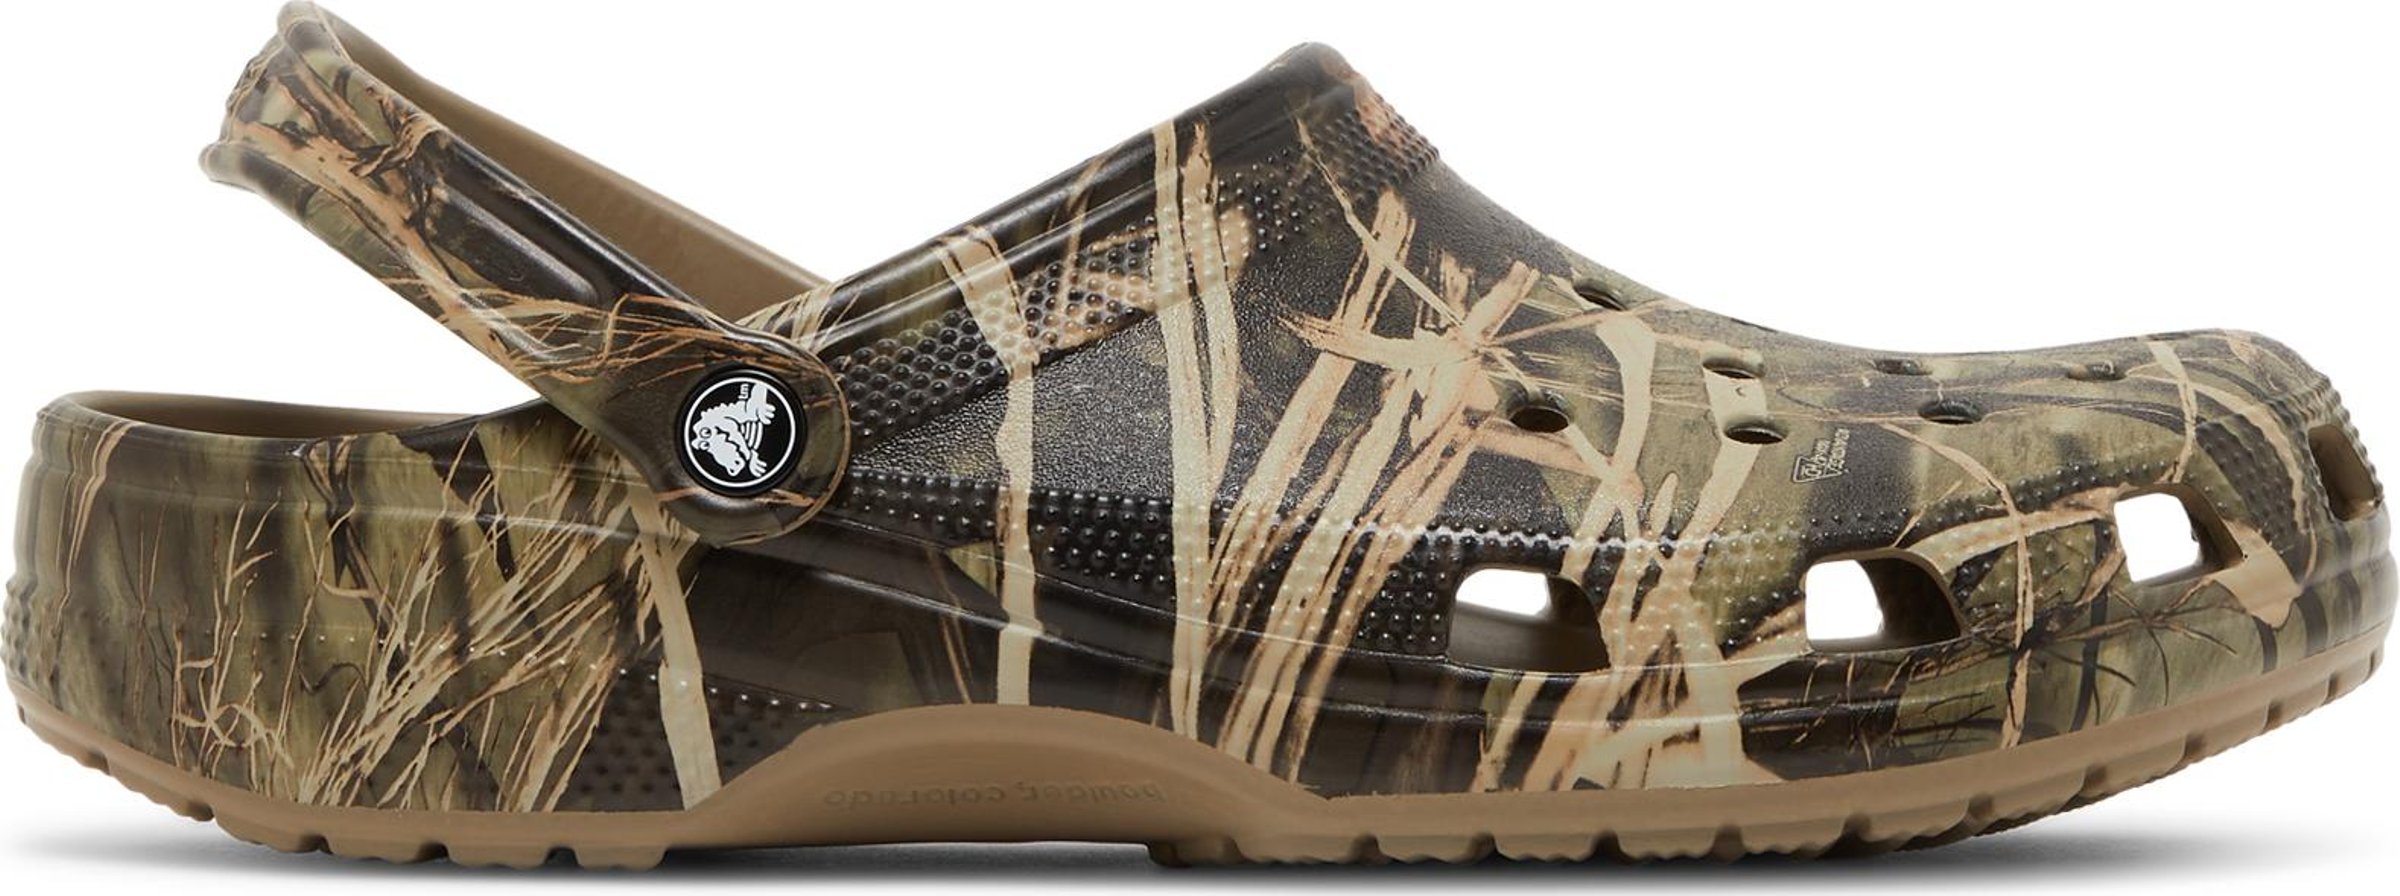 Buy Realtree x Classic Clog V2 'Max-4 HD Camouflage' - 12132 260 | GOAT